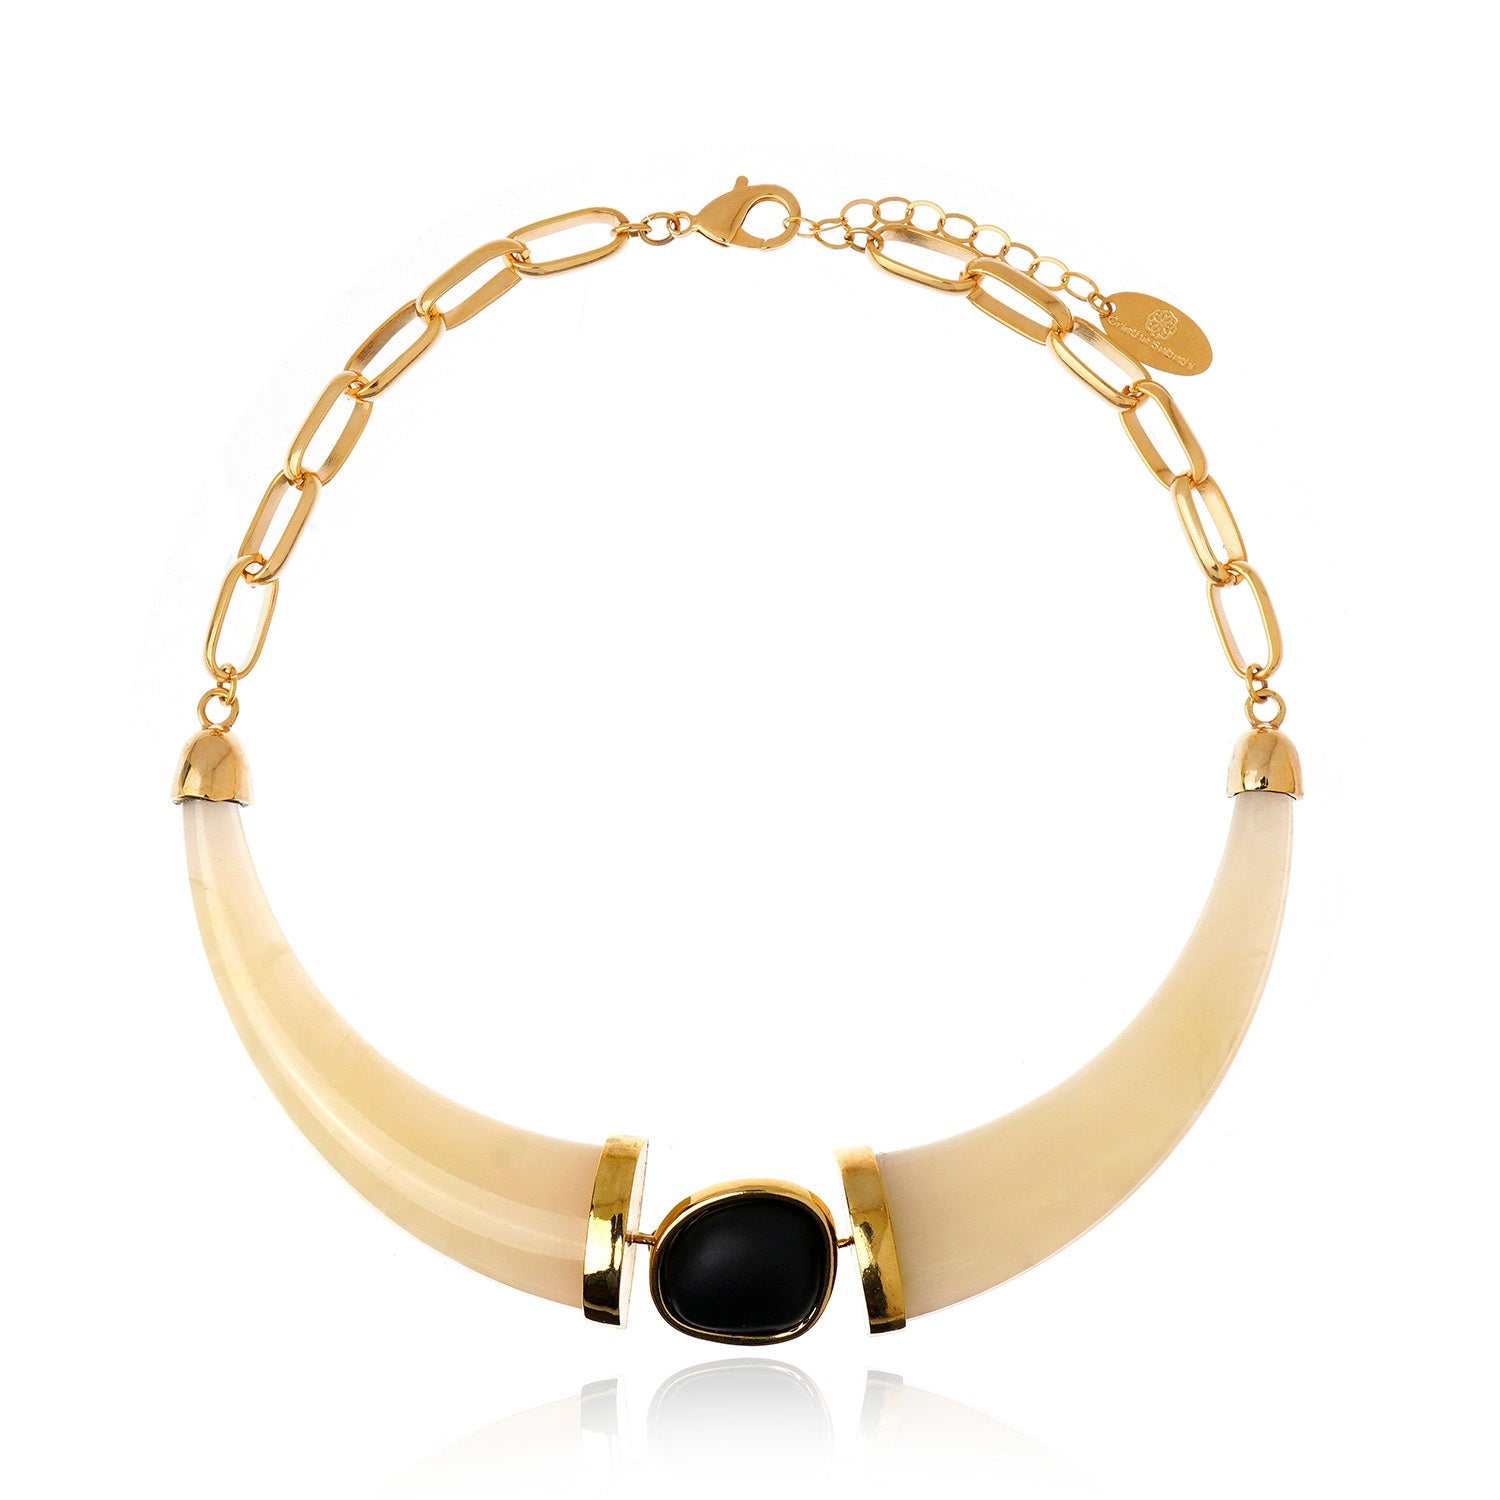 Horn Resin Necklace - Sand and Black